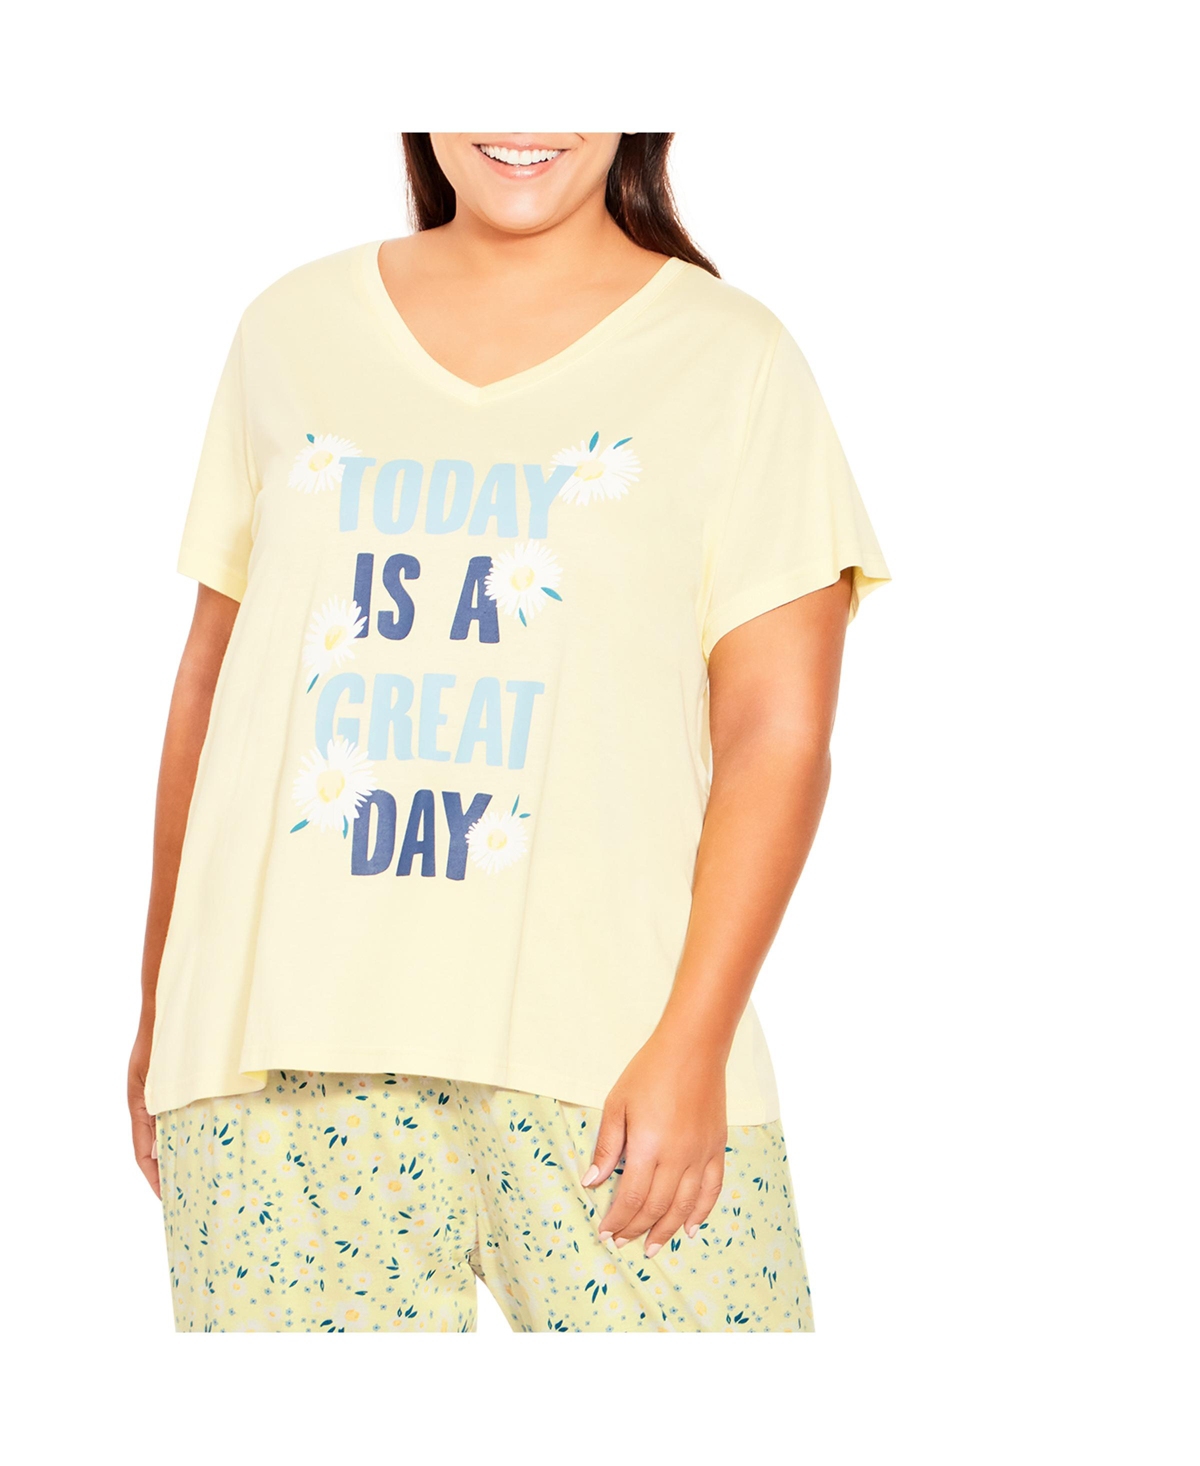 Plus Size Short Sleeve Great Day Sleep Top - Great day